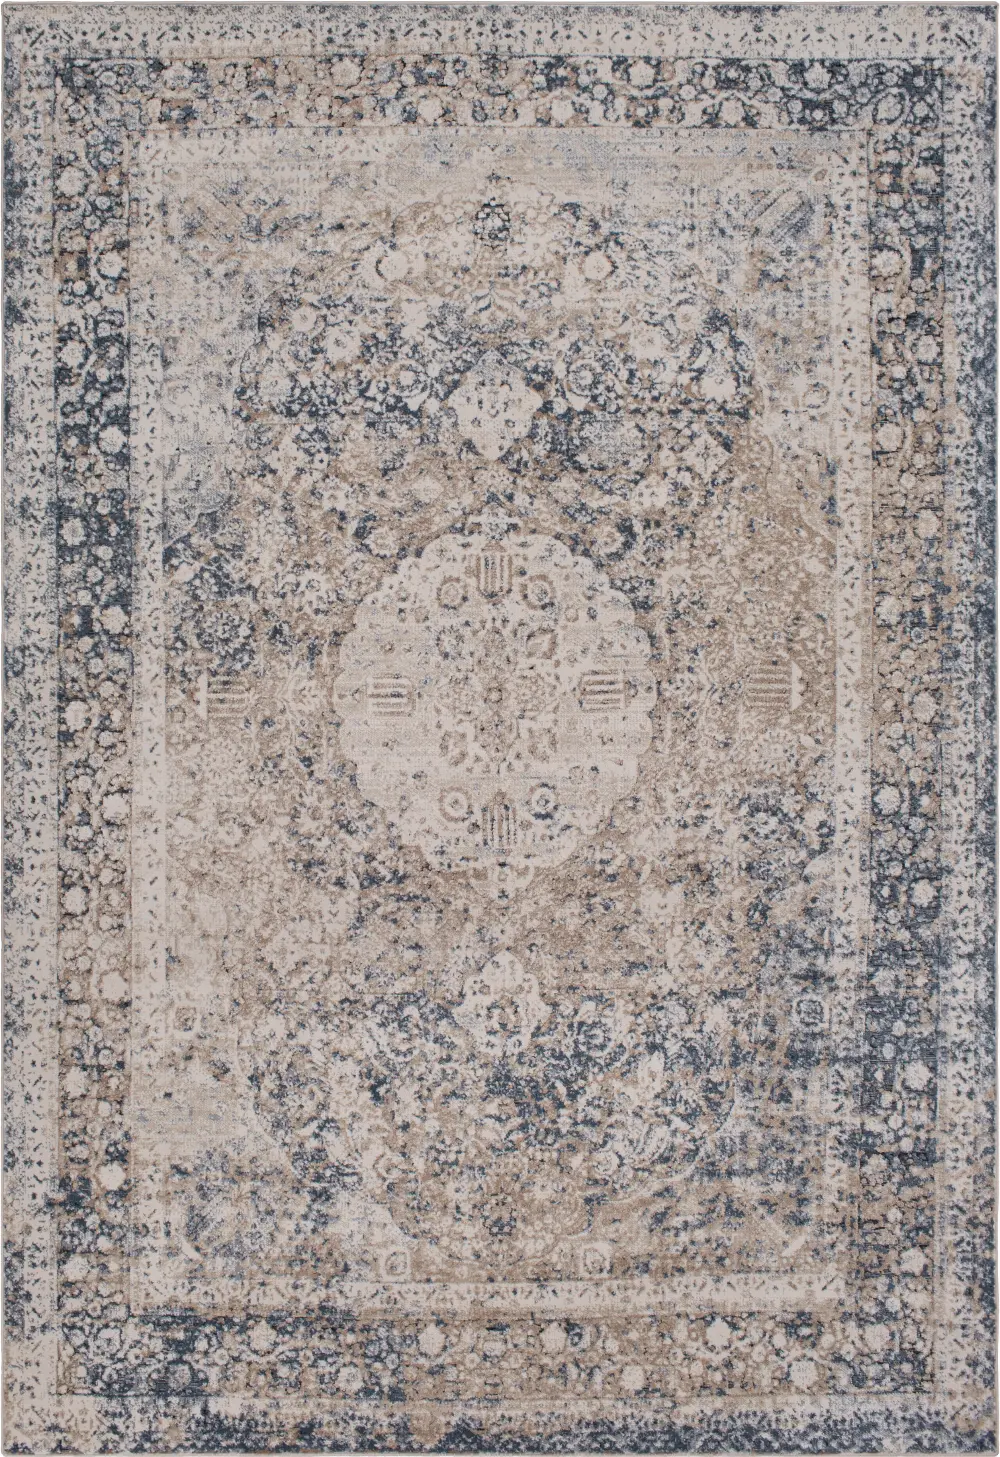 7 x 9 Large Taupe and Charcoal Gray Area Rug - Durham-1